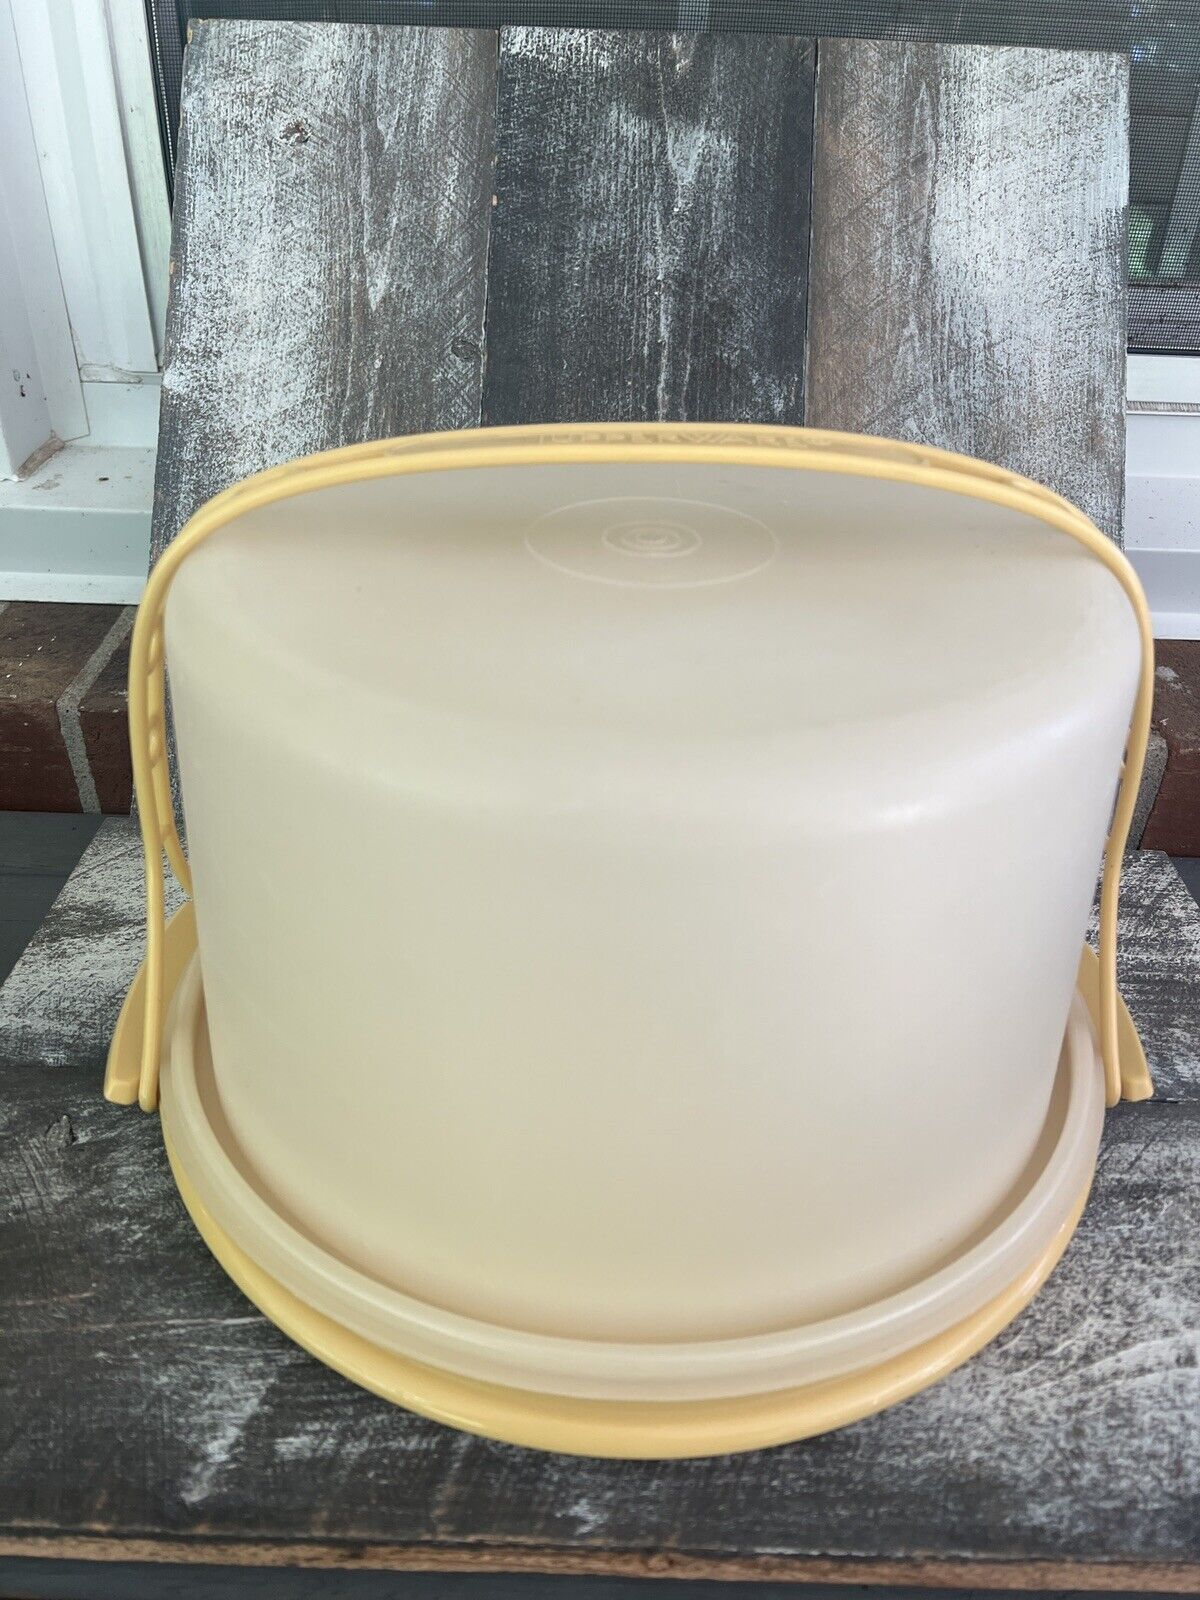 VINTAGE Tupperware Cake Taker Round 684-5 Harvest Gold Carrier With Lid & Handle